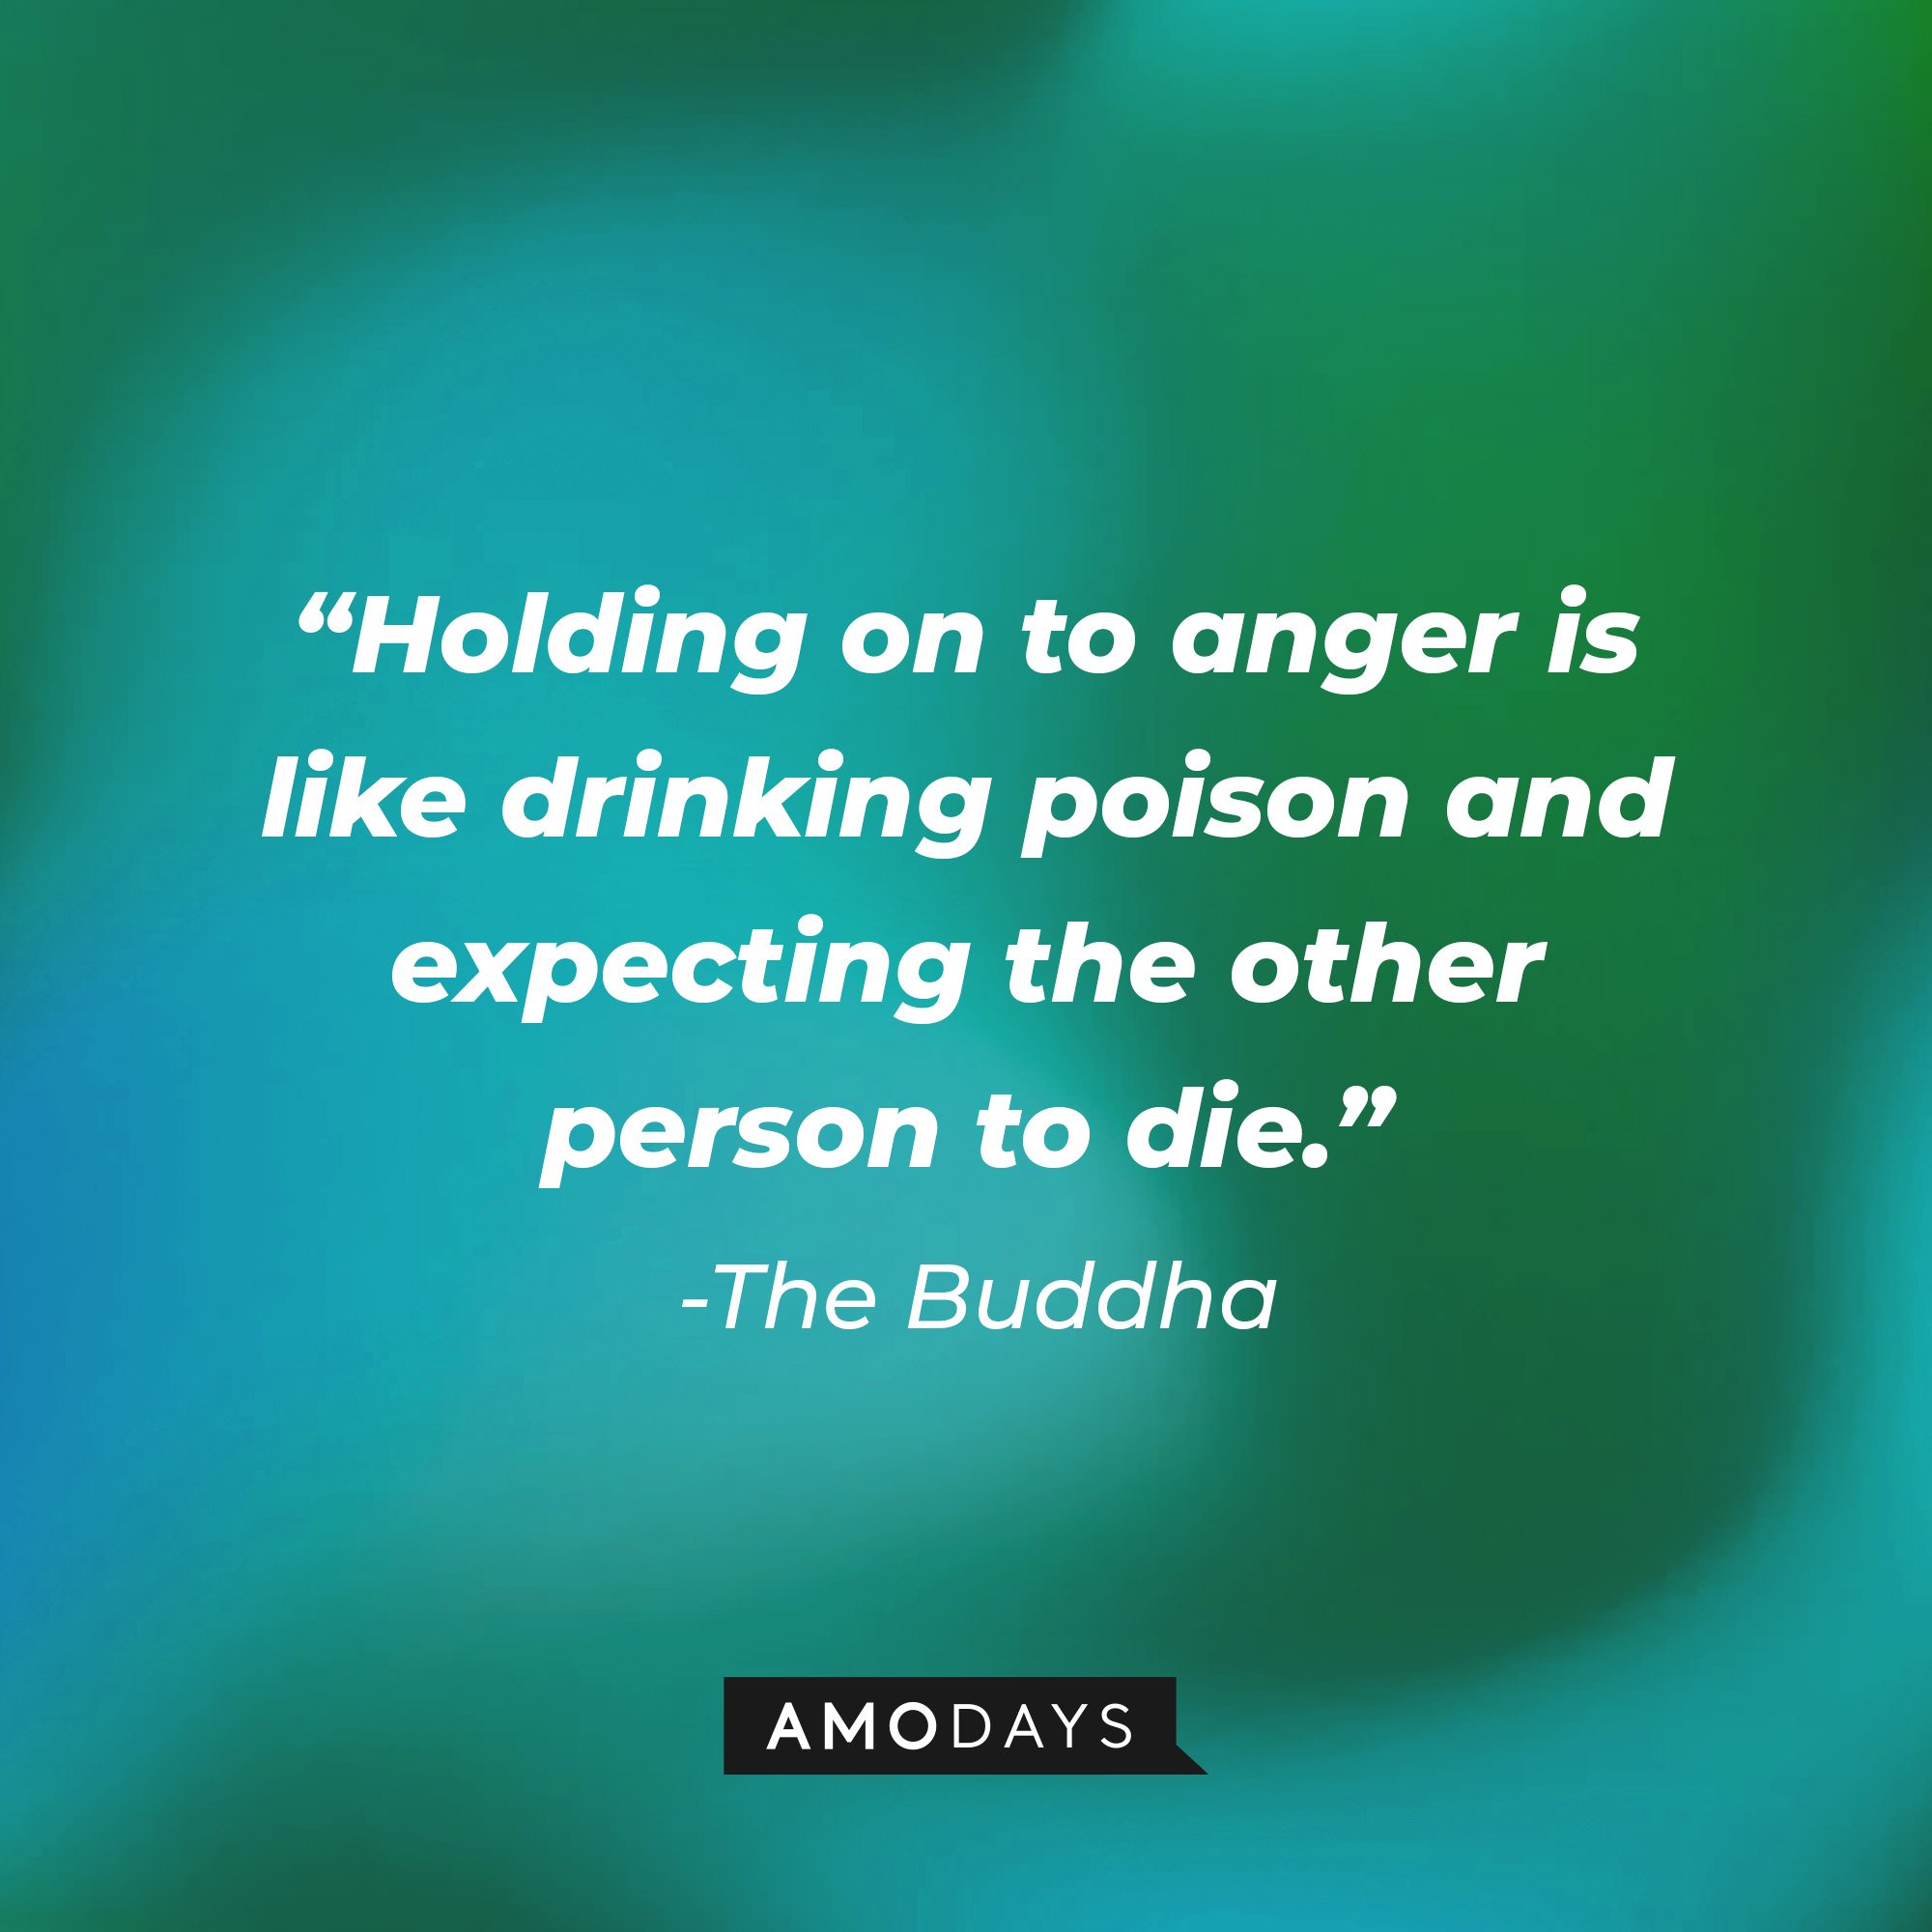 The Buddahs quote: “Holding on to anger is like drinking poison and expecting the other person to die." | Image: AmoDays